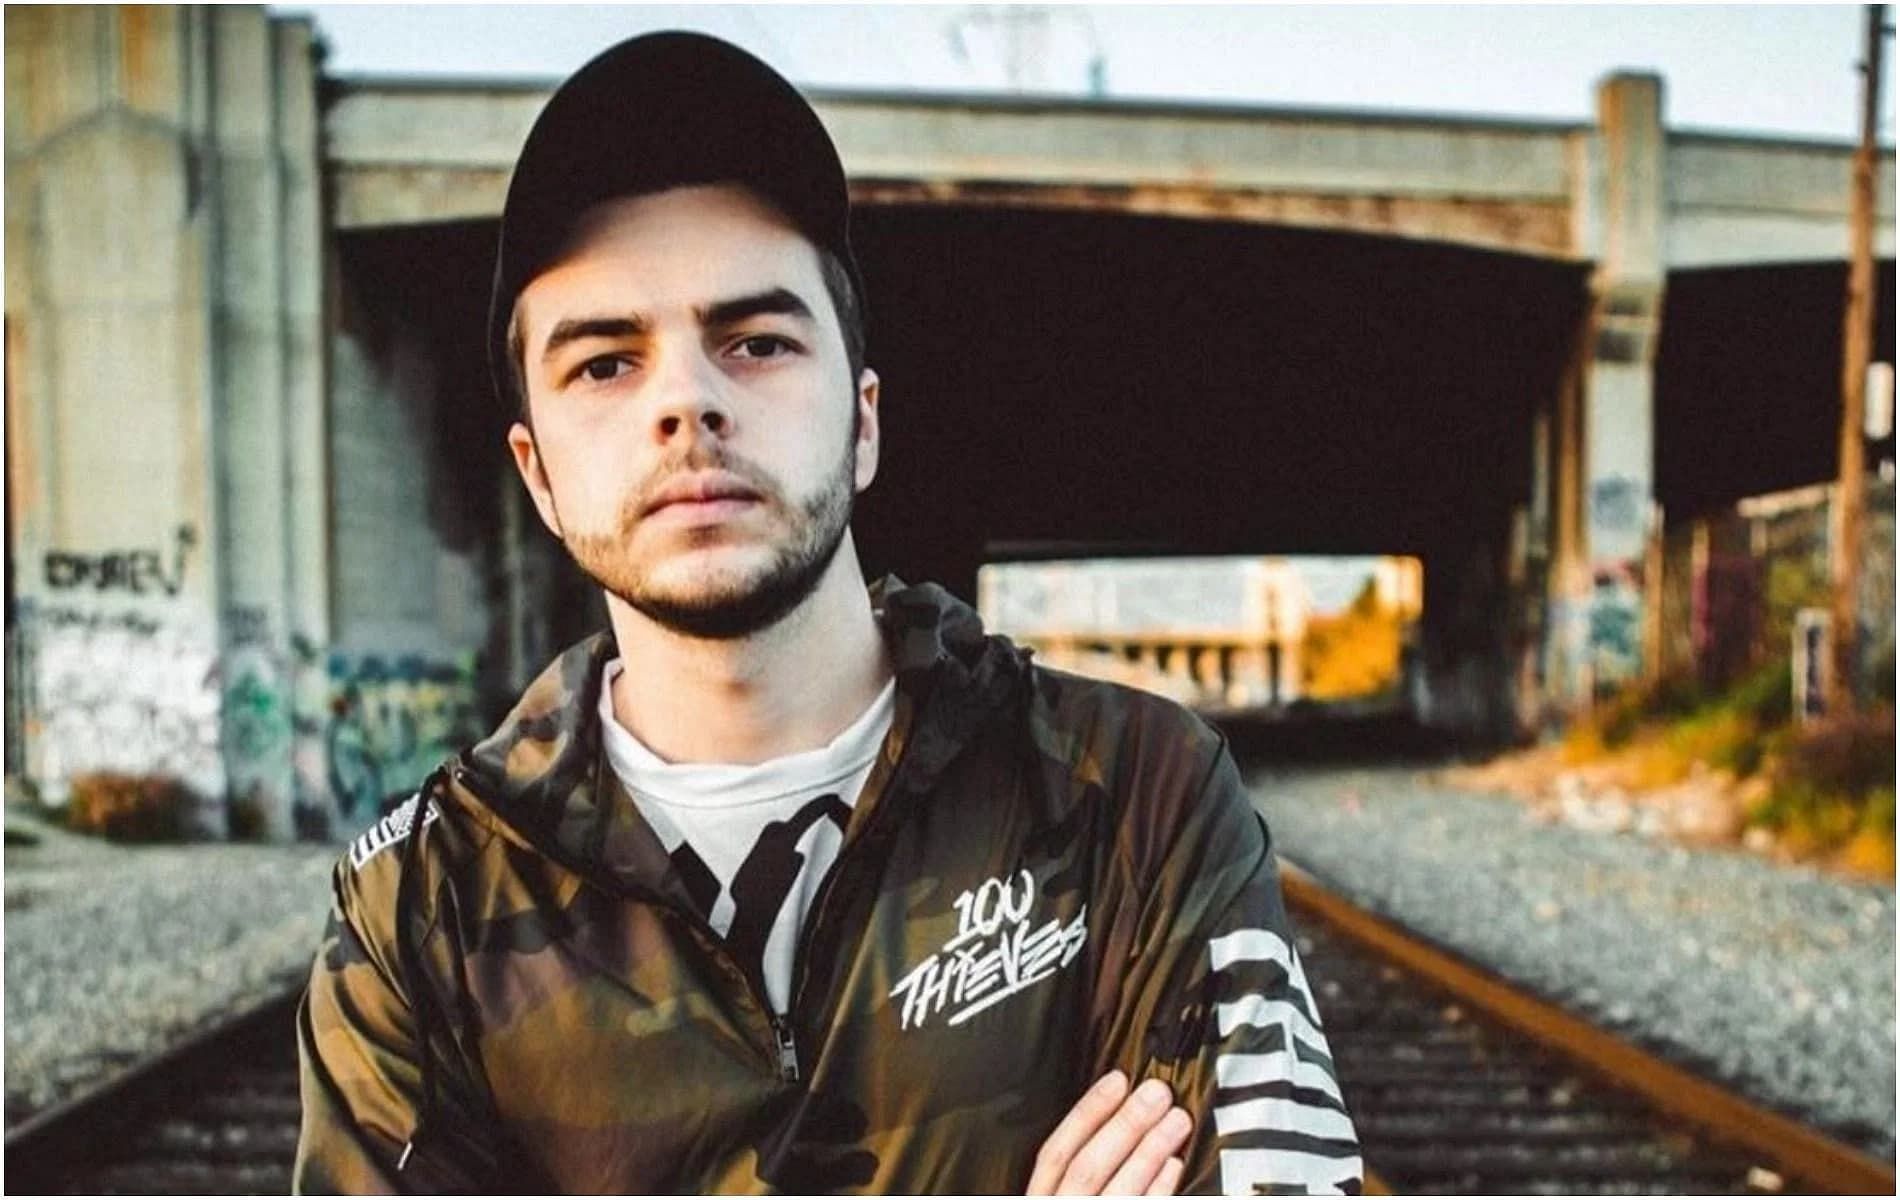 Nadeshot currently owns 100Thieves (Image via 100Thieves)